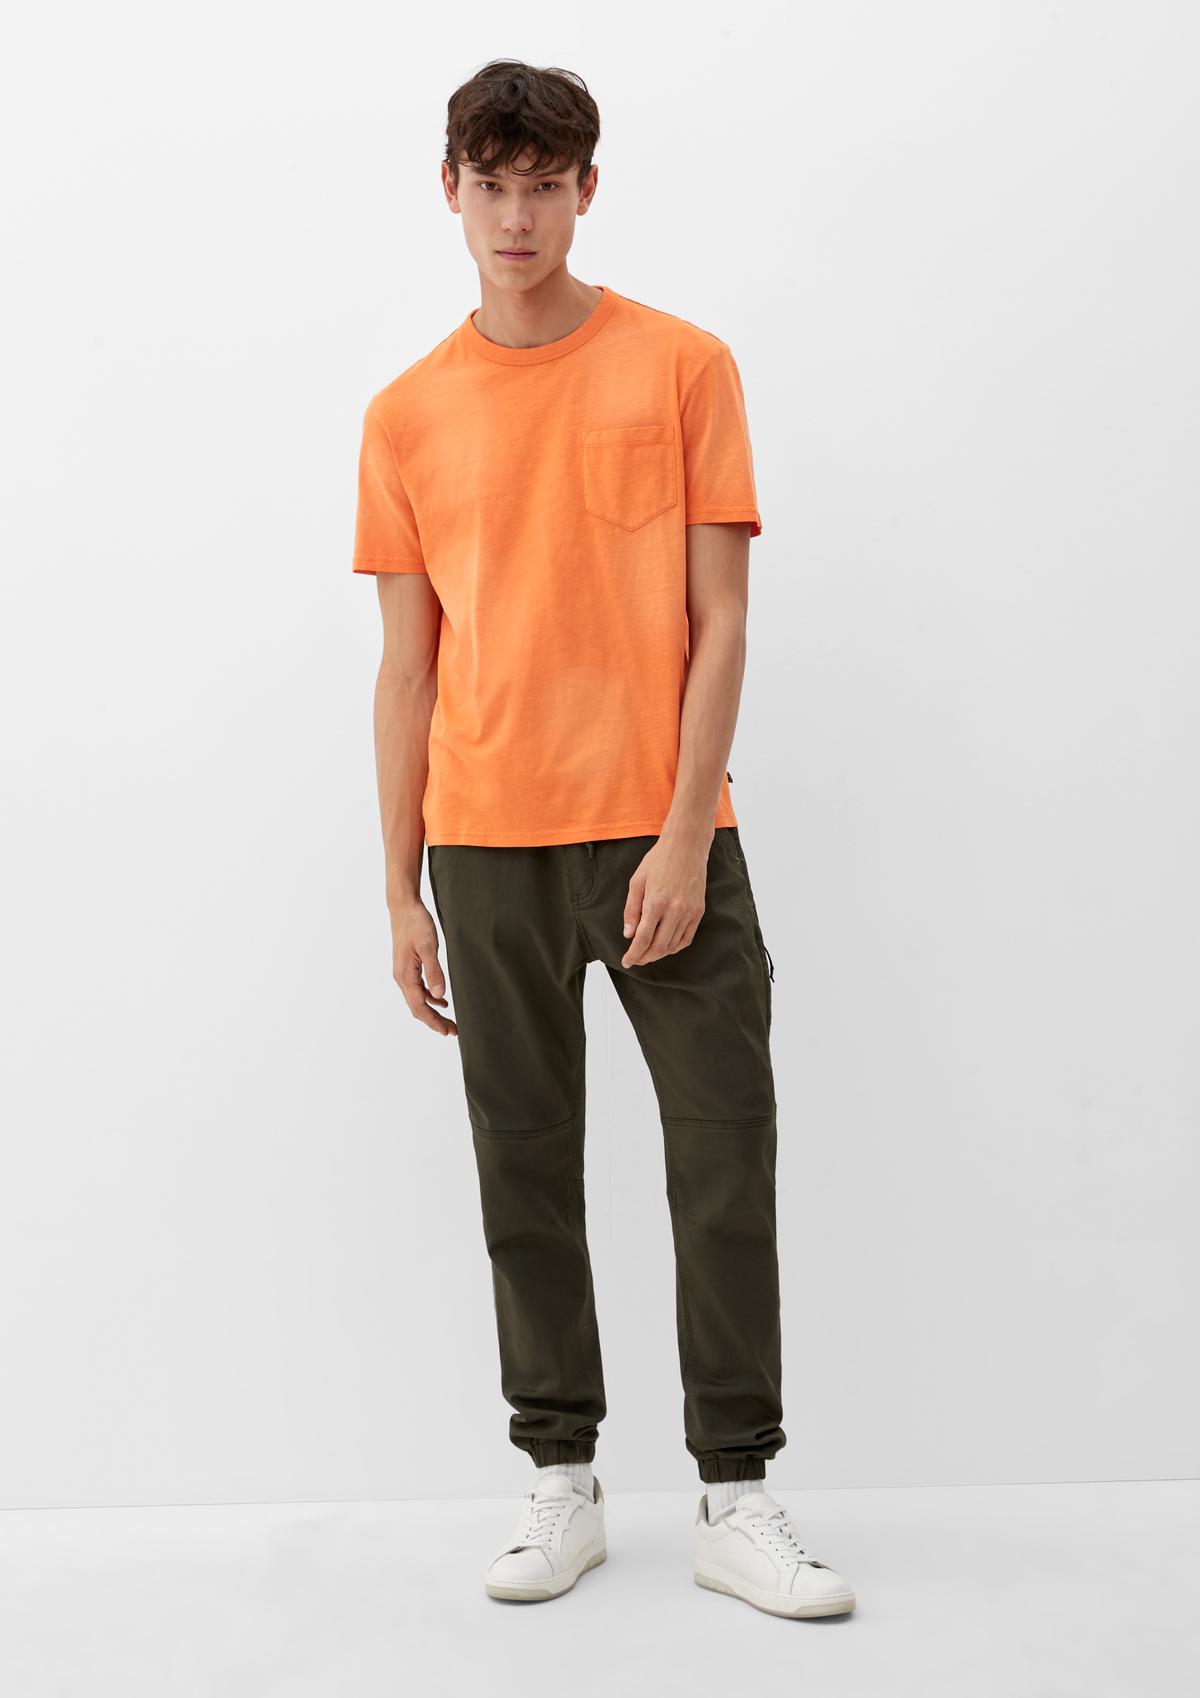 - breast pocket with orange a T-shirt